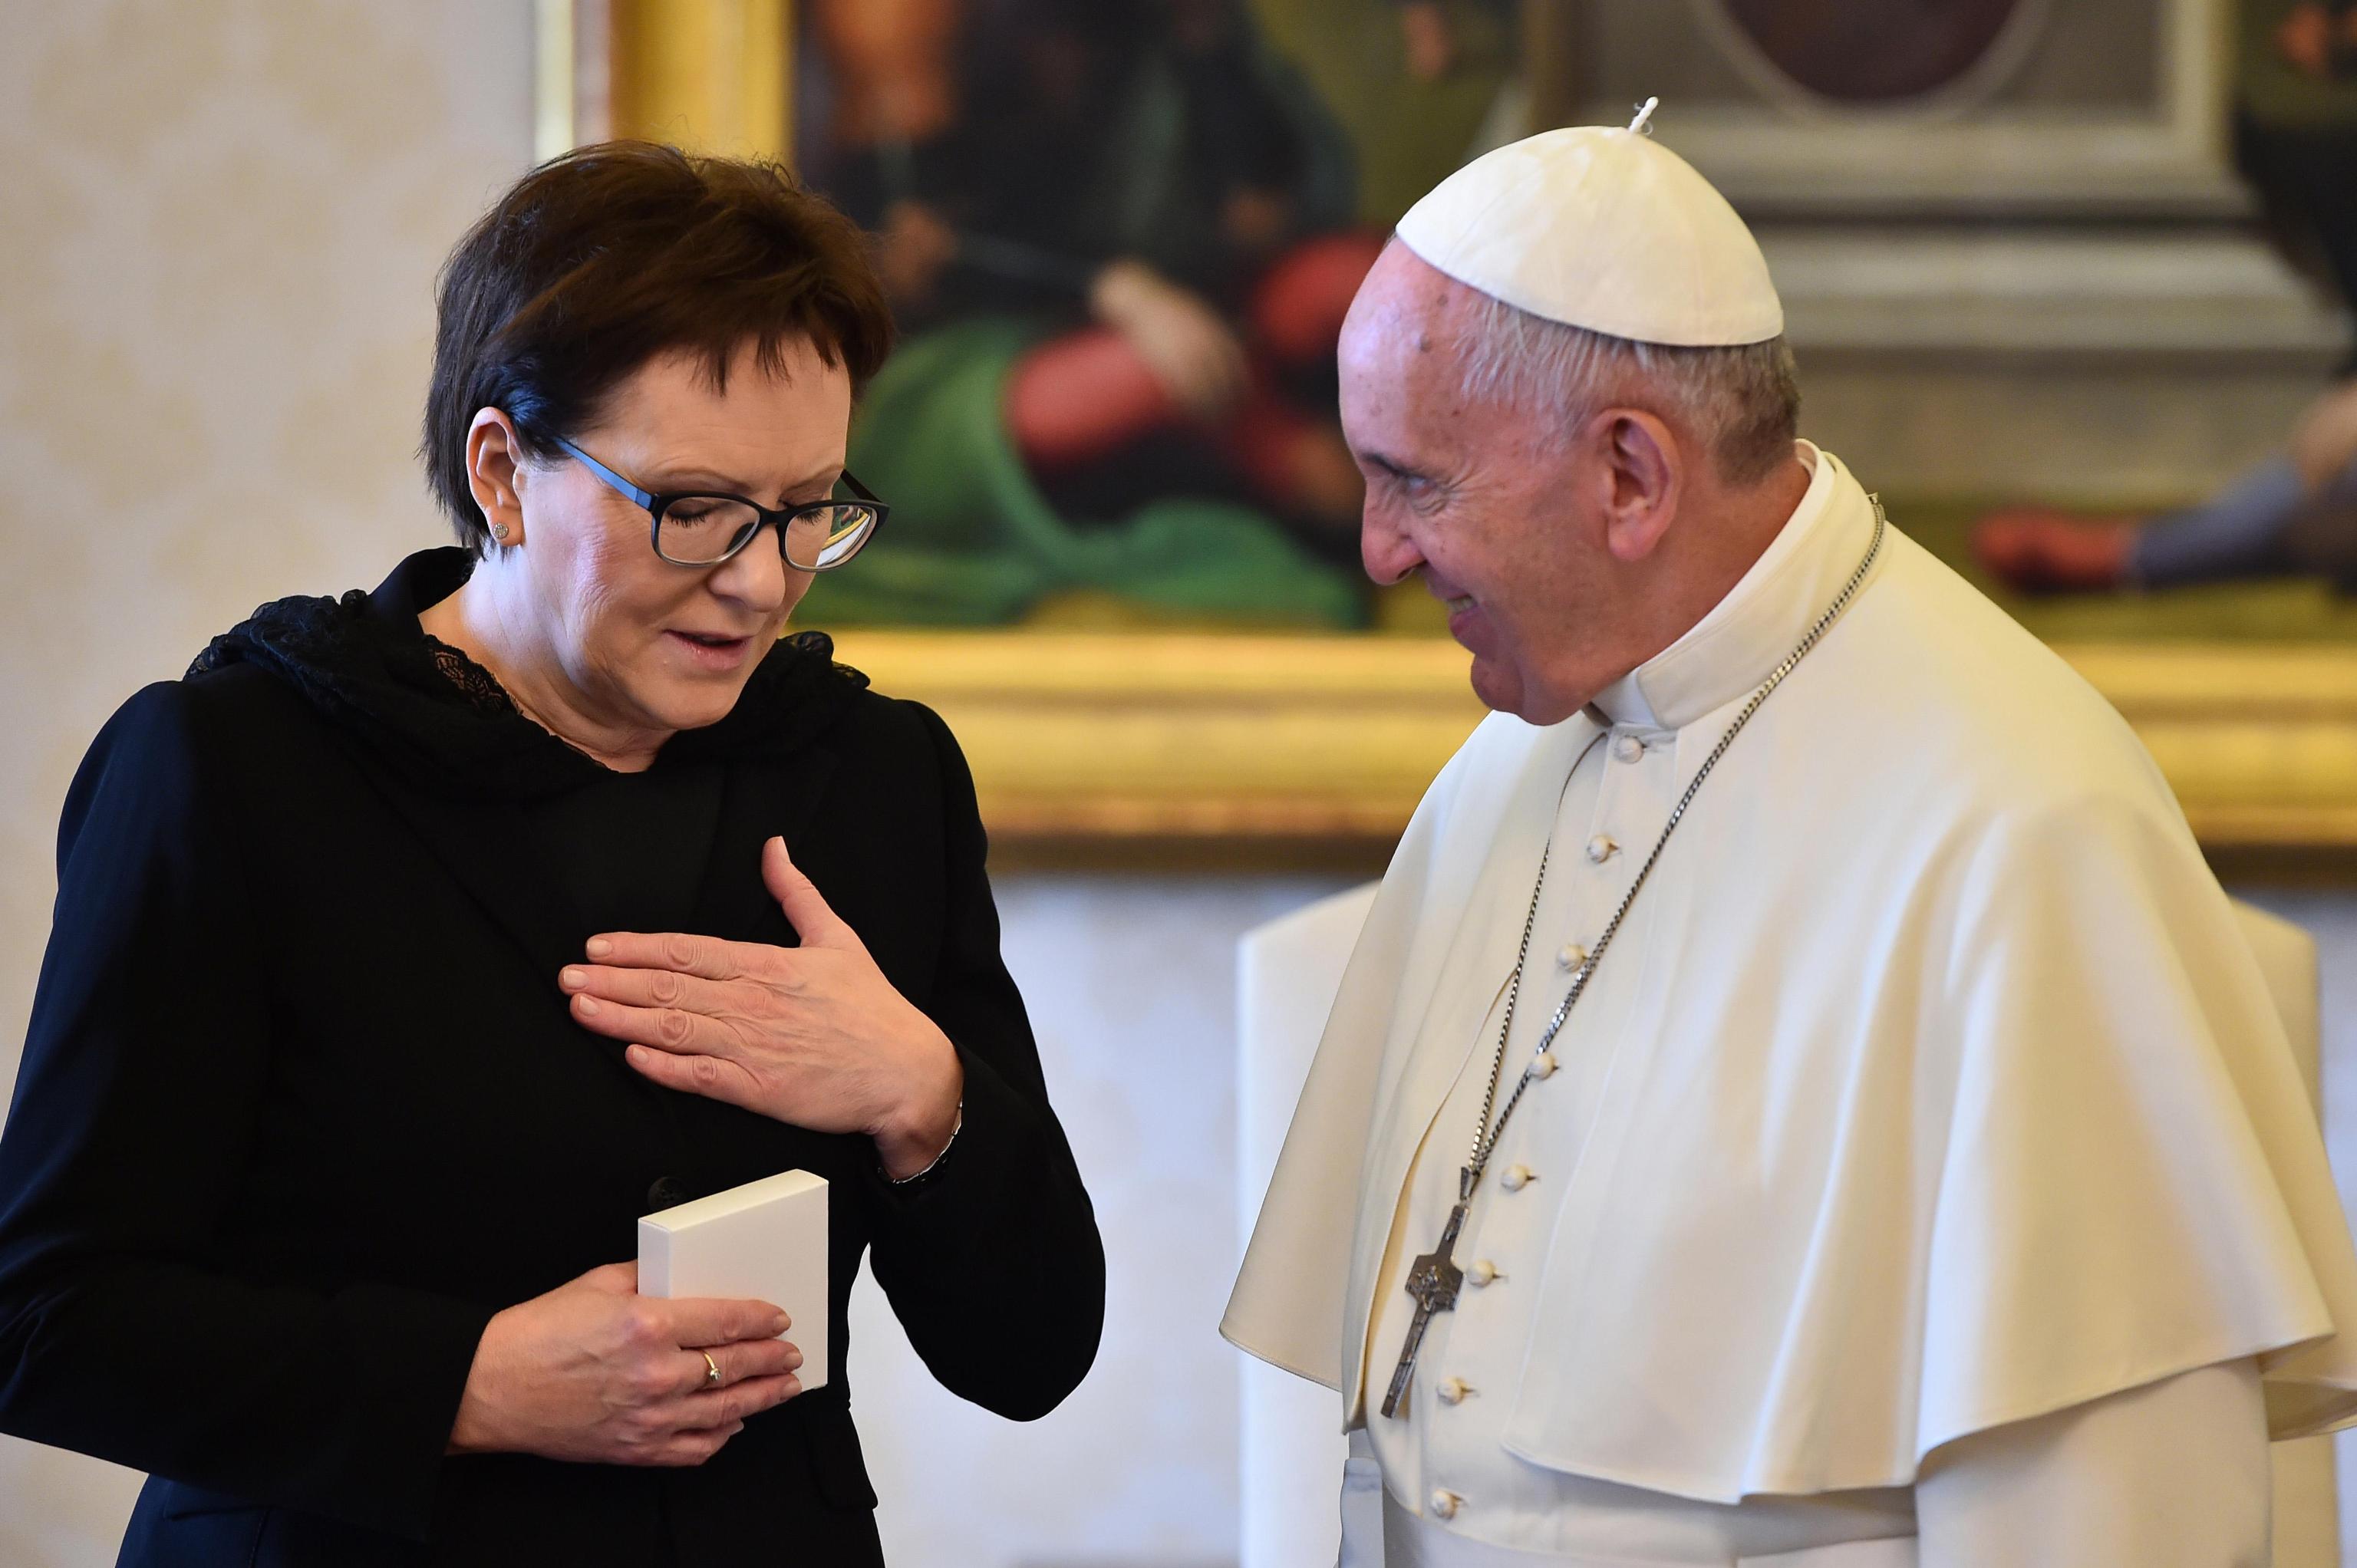 Pope Francis meets with Poland's Prime Minister Ewa Kopacz during a private audience on June 12